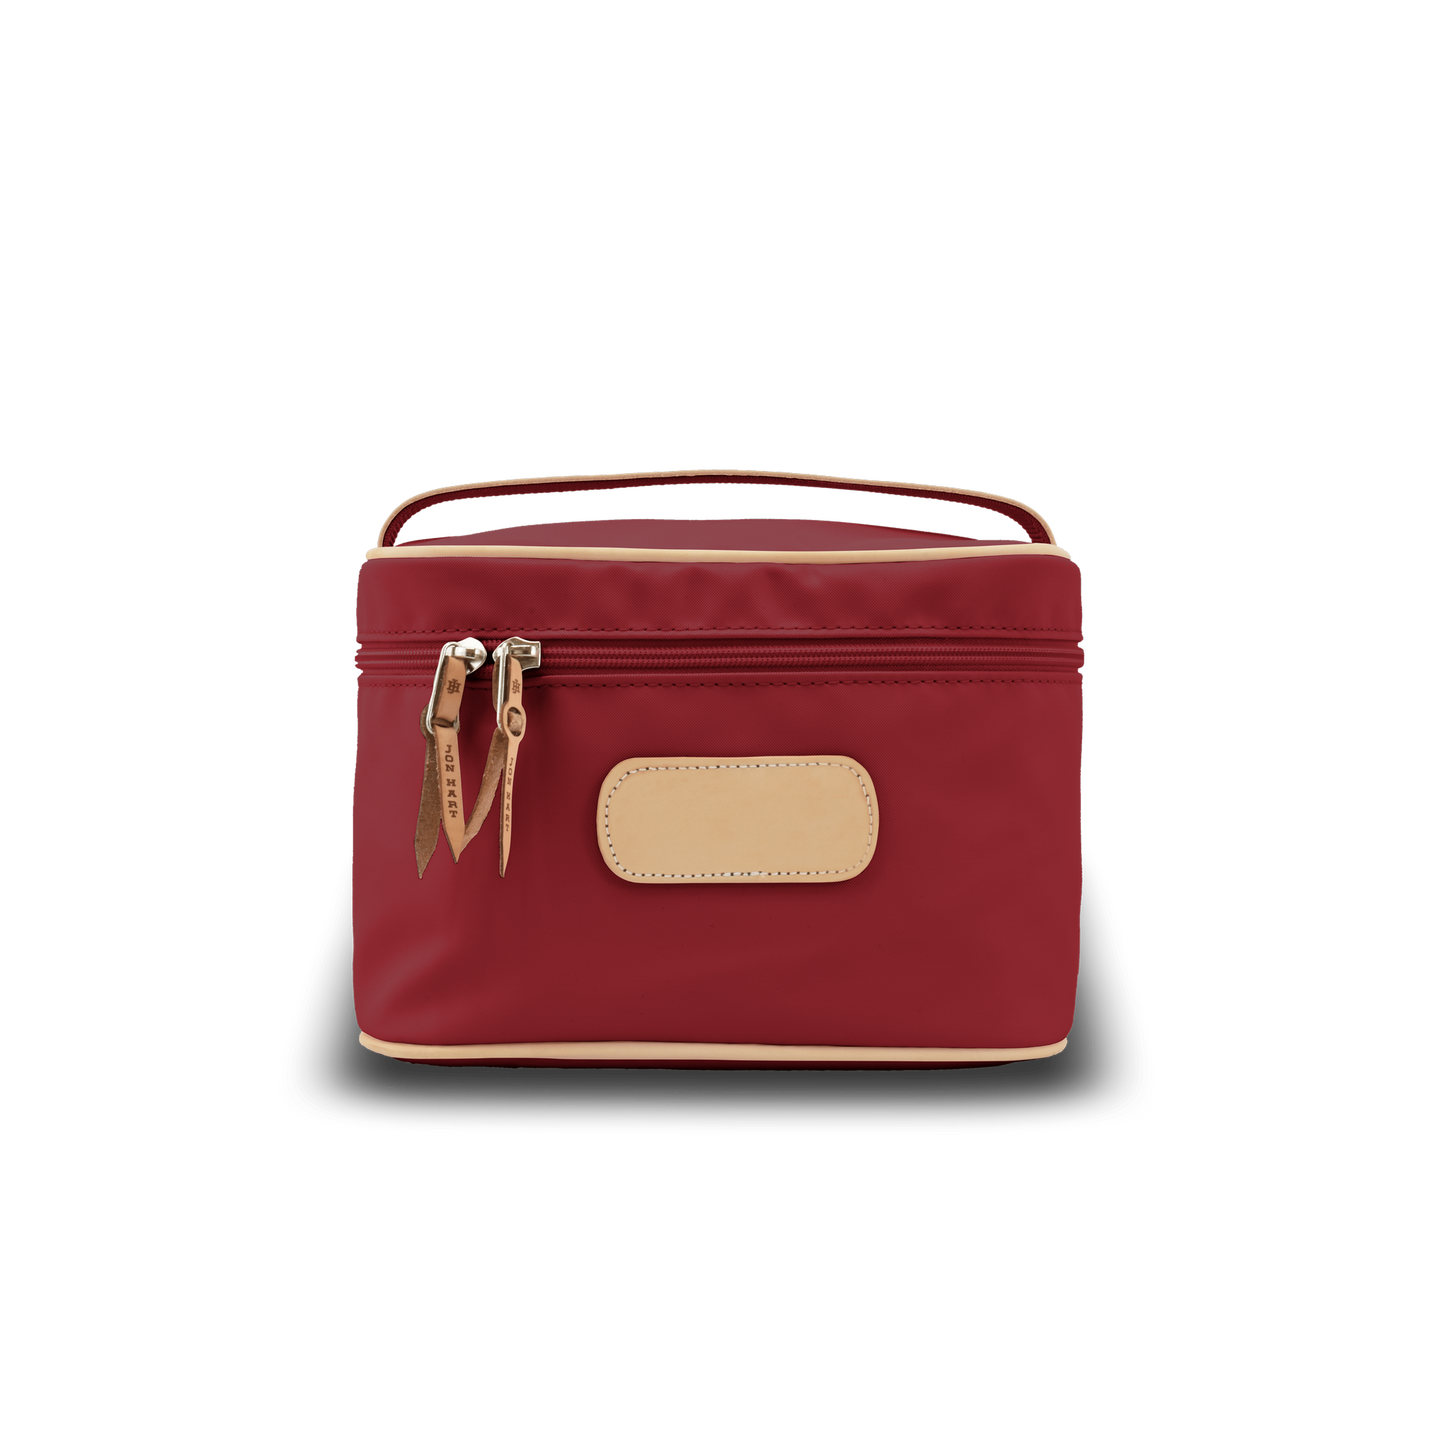 Makeup Case - Red Coated Canvas Front Angle in Color 'Red Coated Canvas'